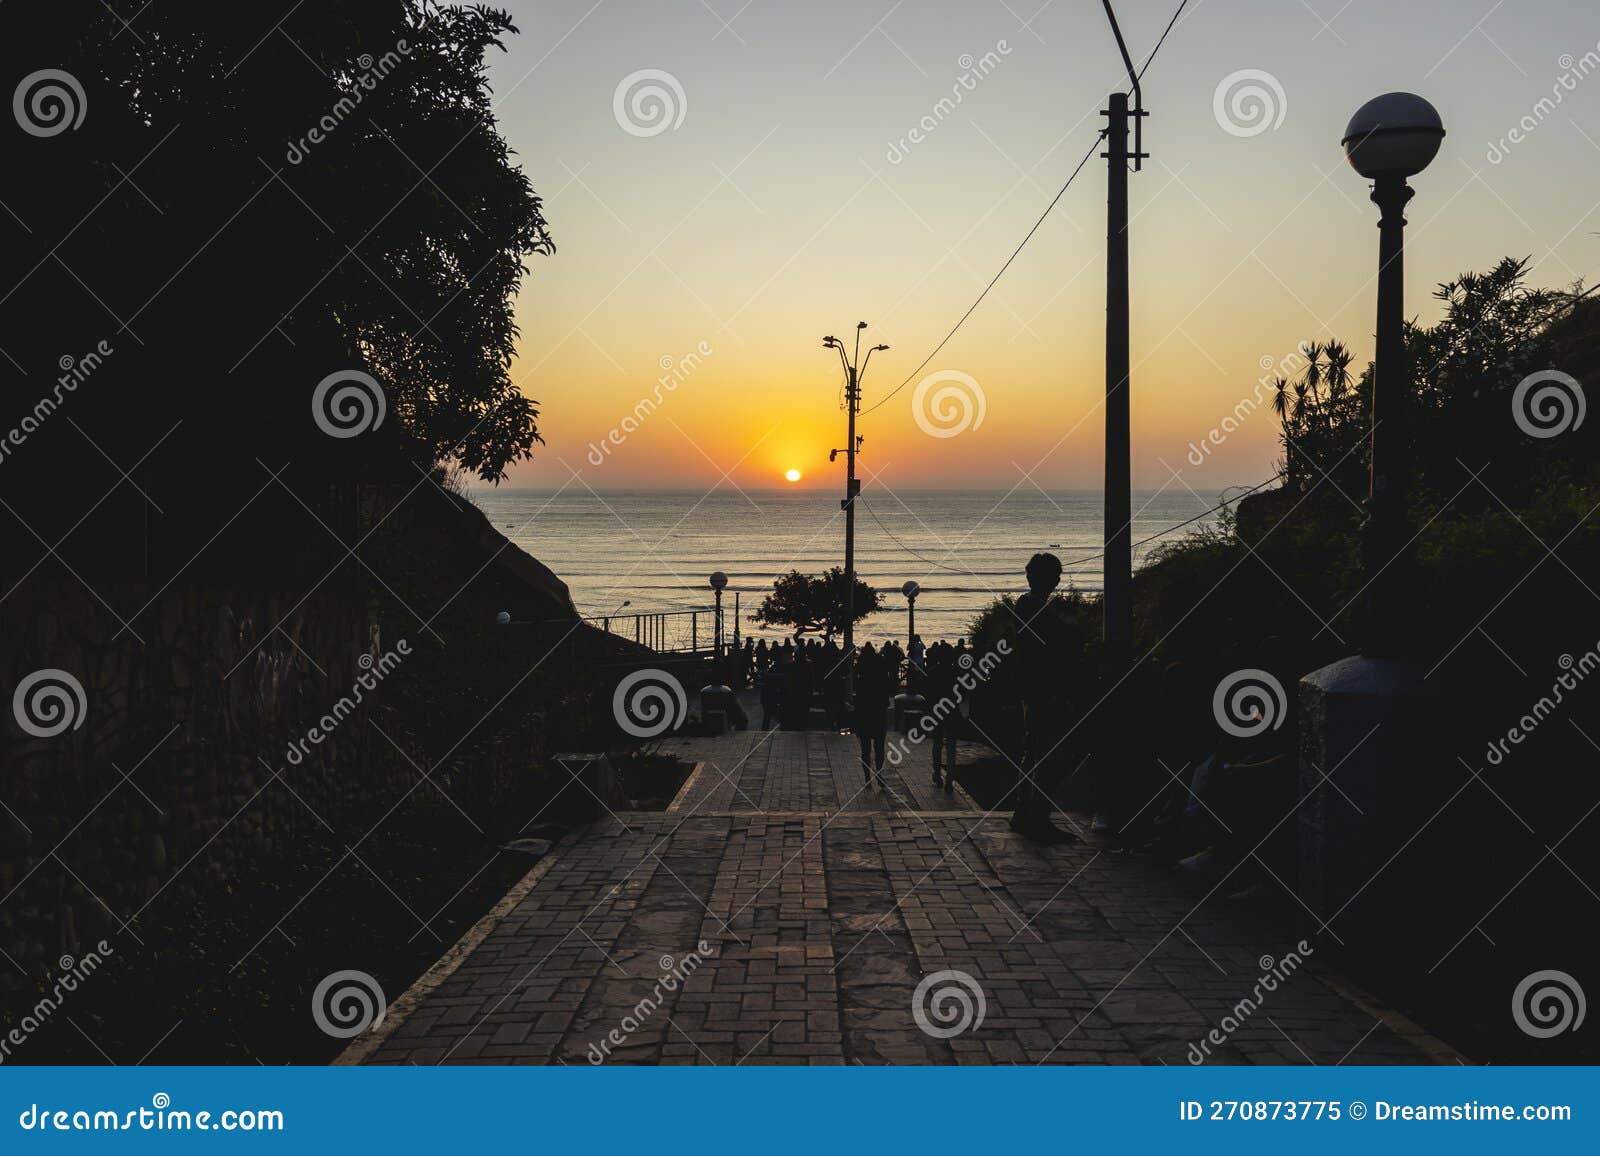 view of the sunset and the beach, from the bajada de baÃ±os, near the beach of barranco, located in barranco, lima - peru